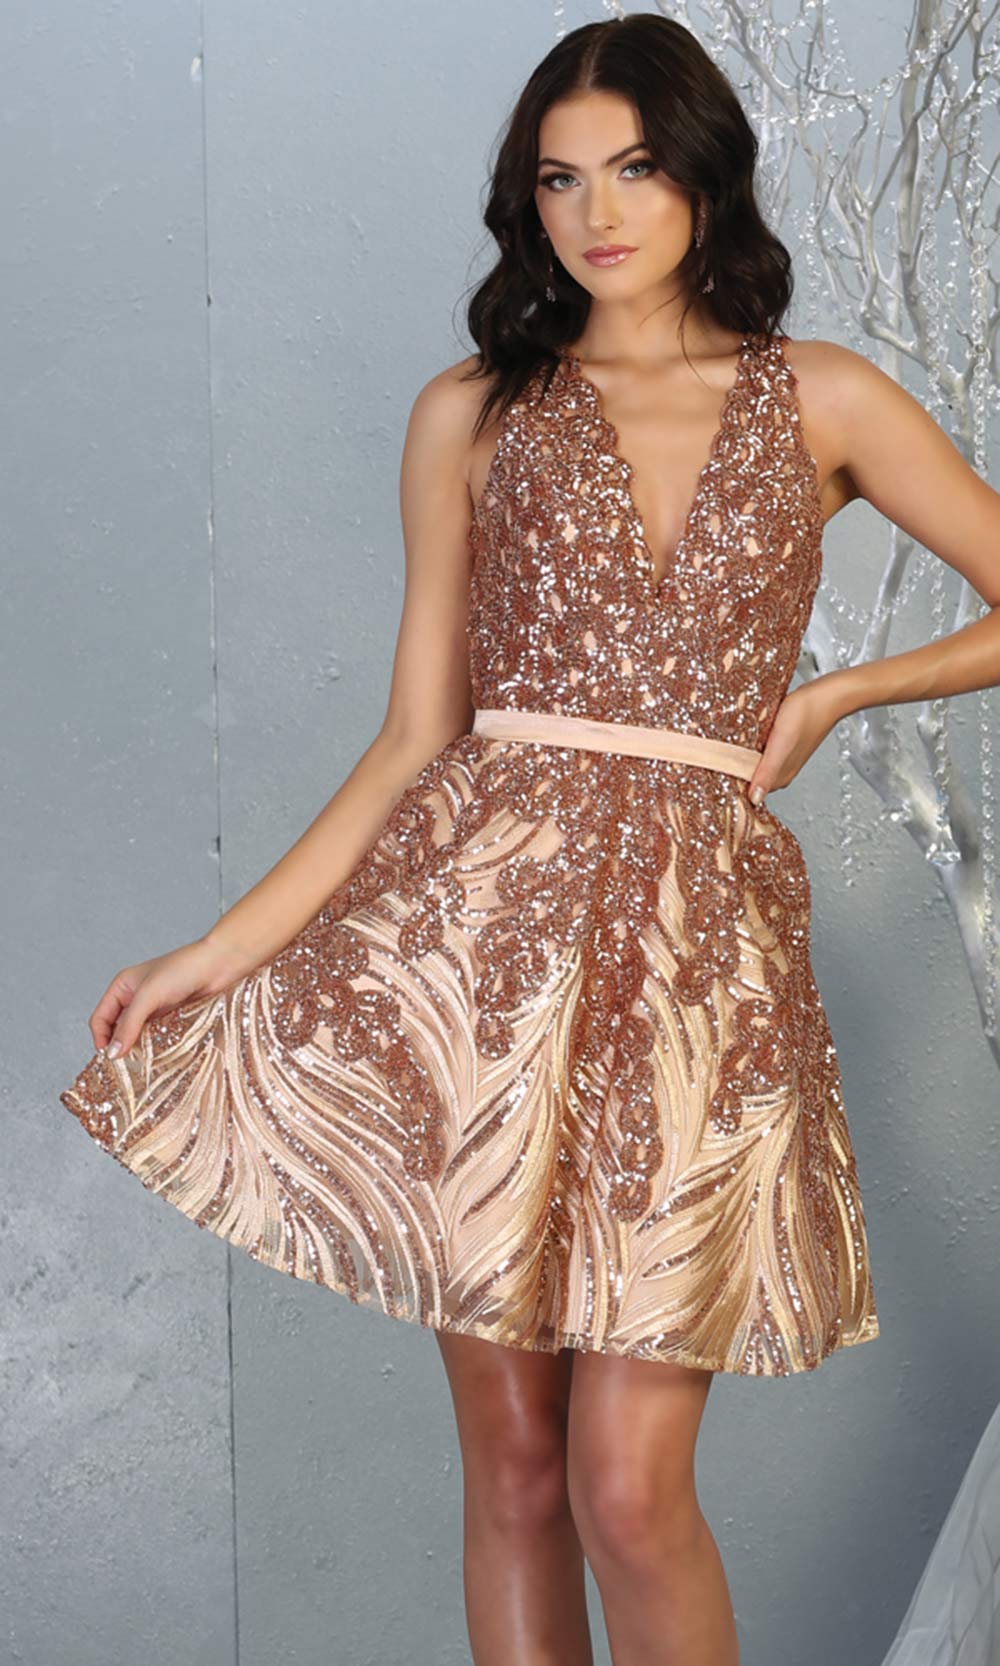 Mayqueen RQ7779 short rose gold sequin flowy vneck grade 8 graduation dress w/ straps & puffy skirt. Light gold party dress is perfect for prom, graduation, grade 8 grad, confirmation dress, bat mitzvah dress, damas. Plus sizes avail for grad dress.jpggrade 8 grad dresses, graduation dresses